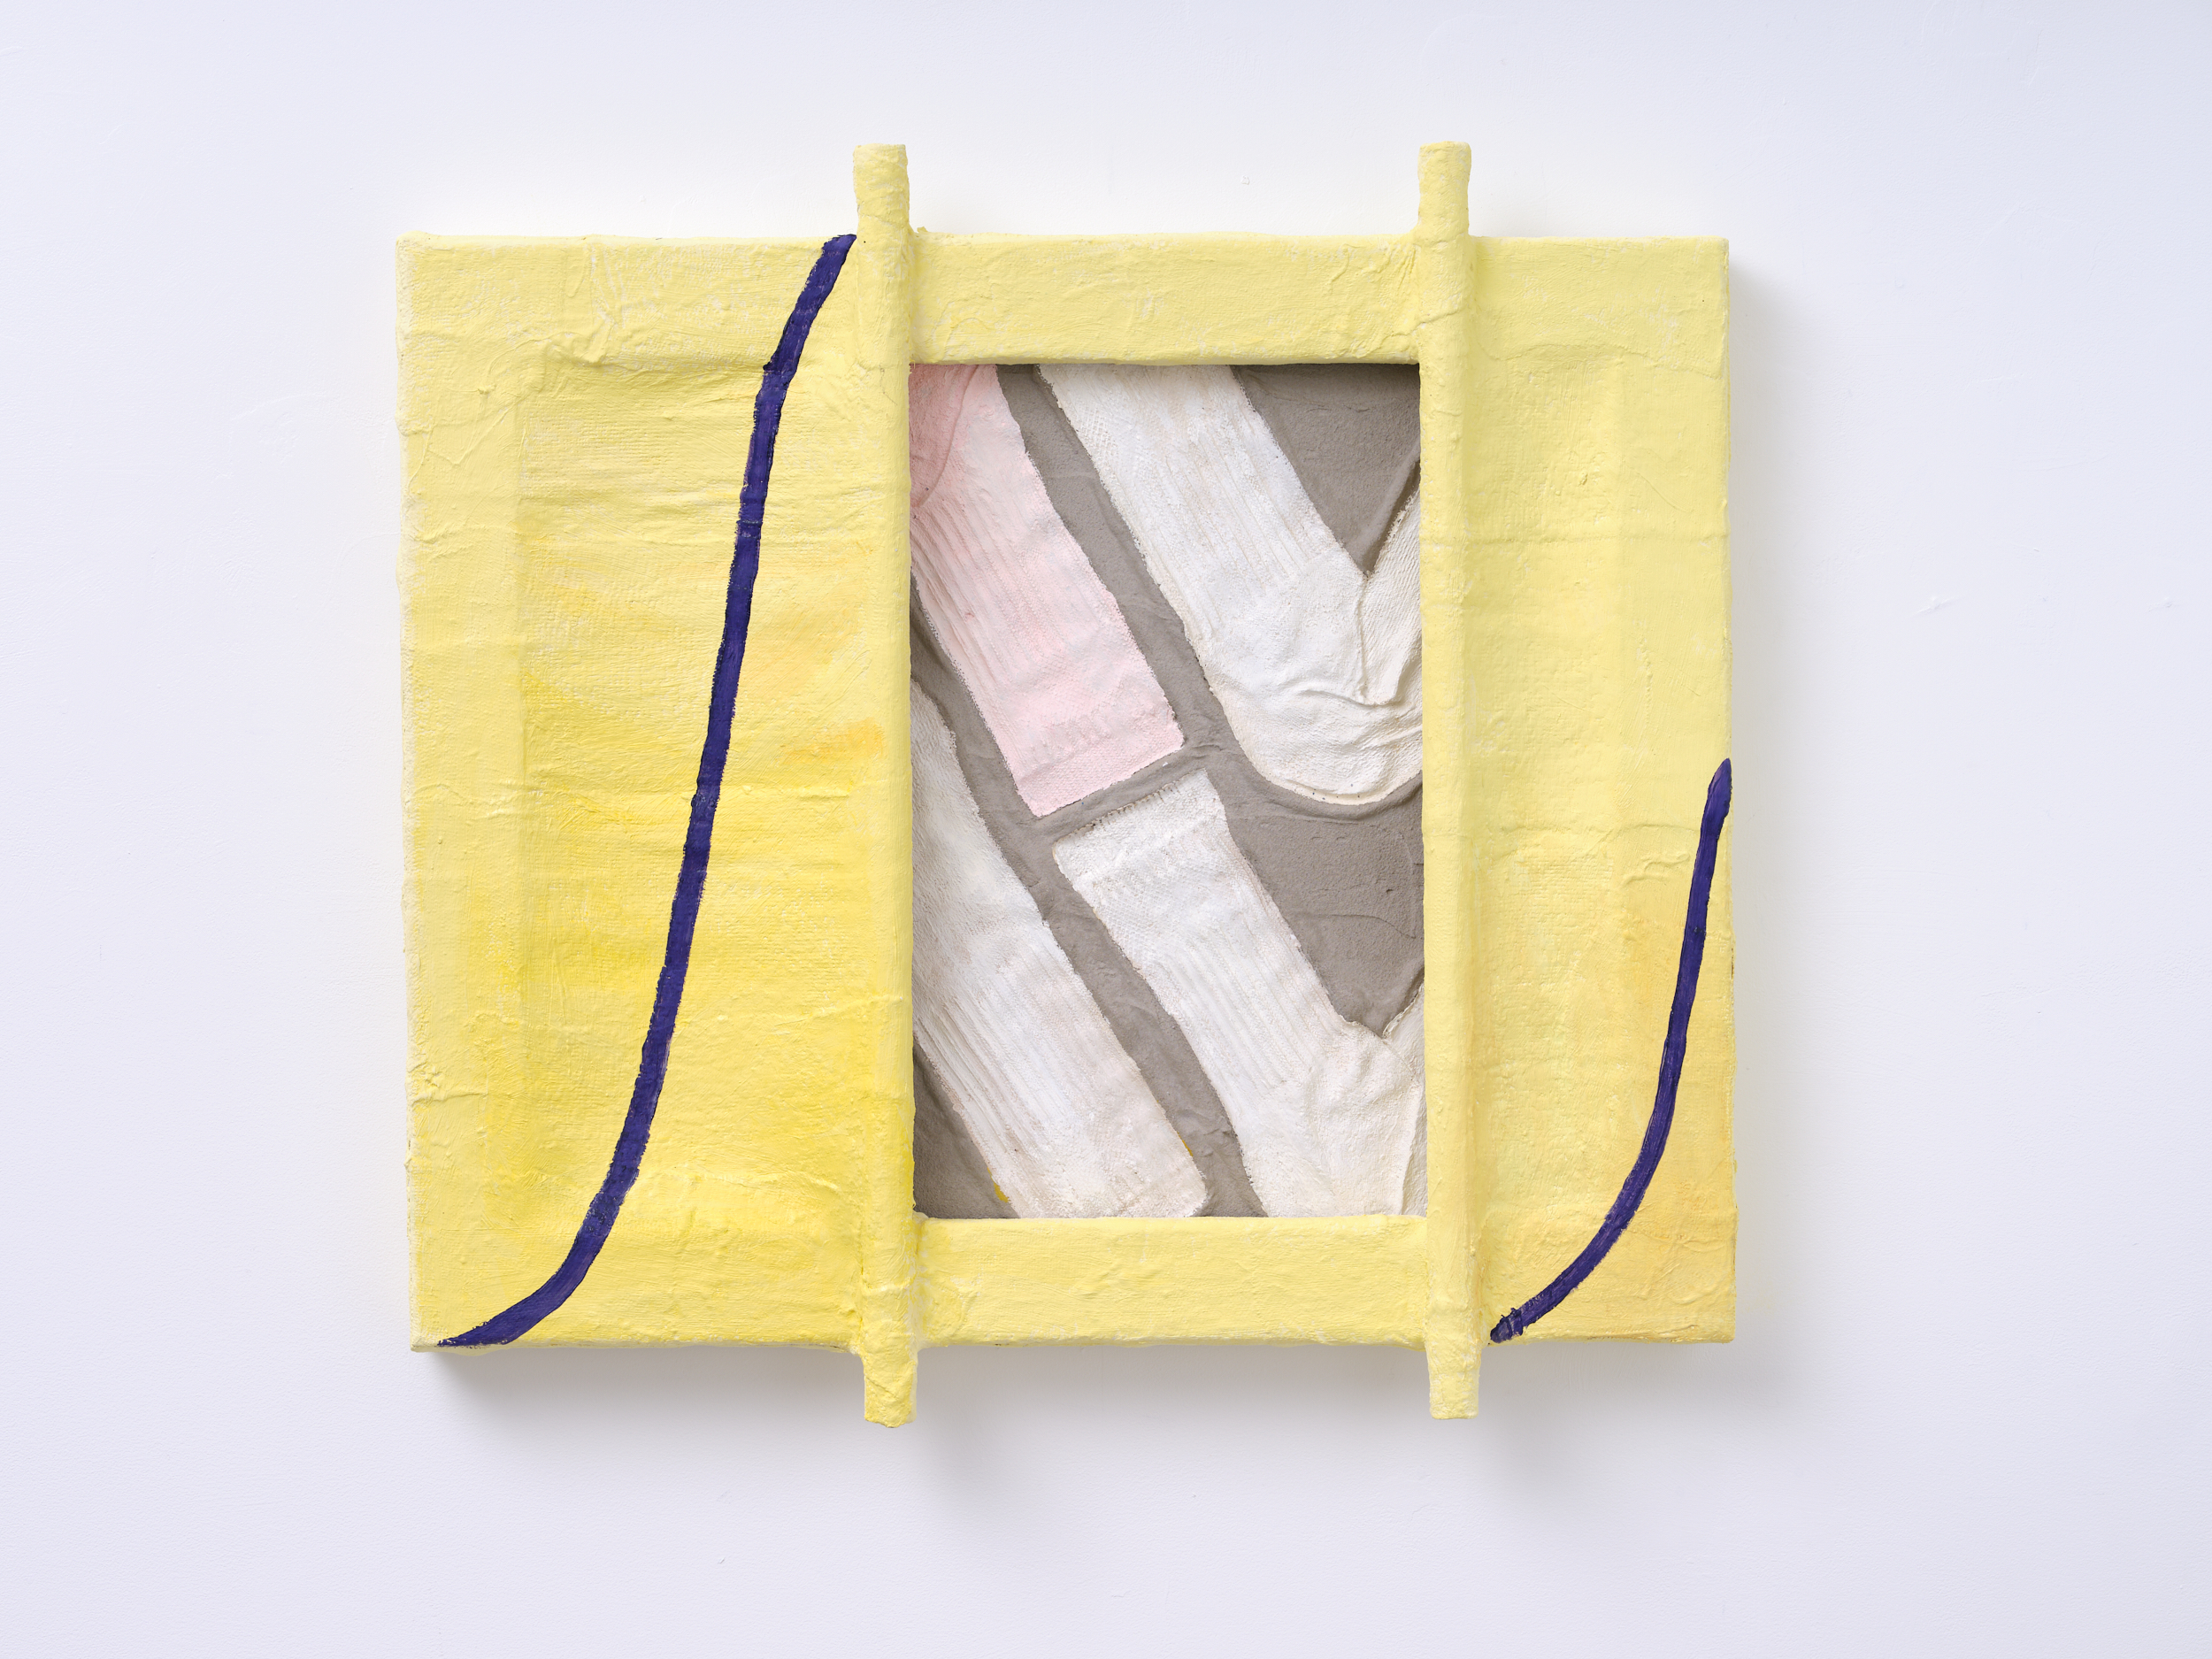 Sculptural painting by Rachel Walters in Plaster bandage, plumbers pipe, concrete, and oil on canvas titled Potentially